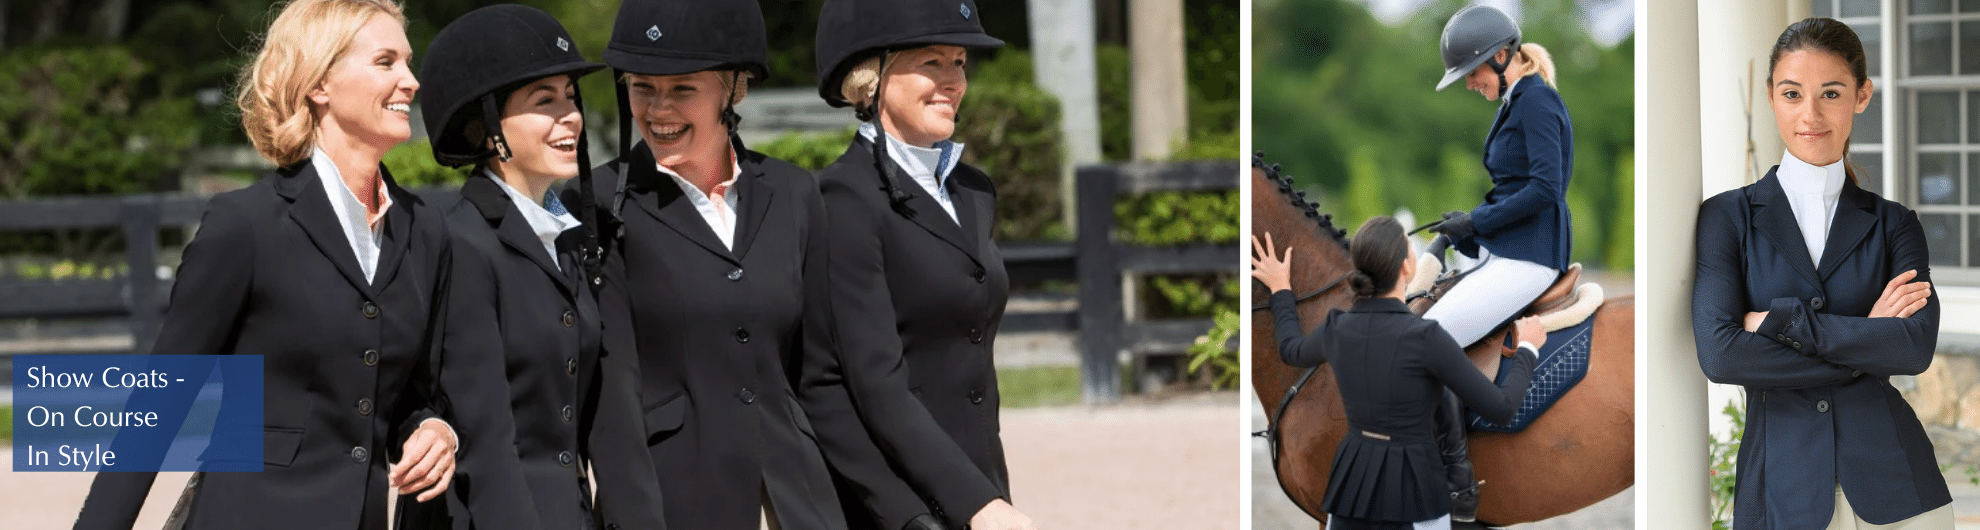 Show Coats - On Course In Style